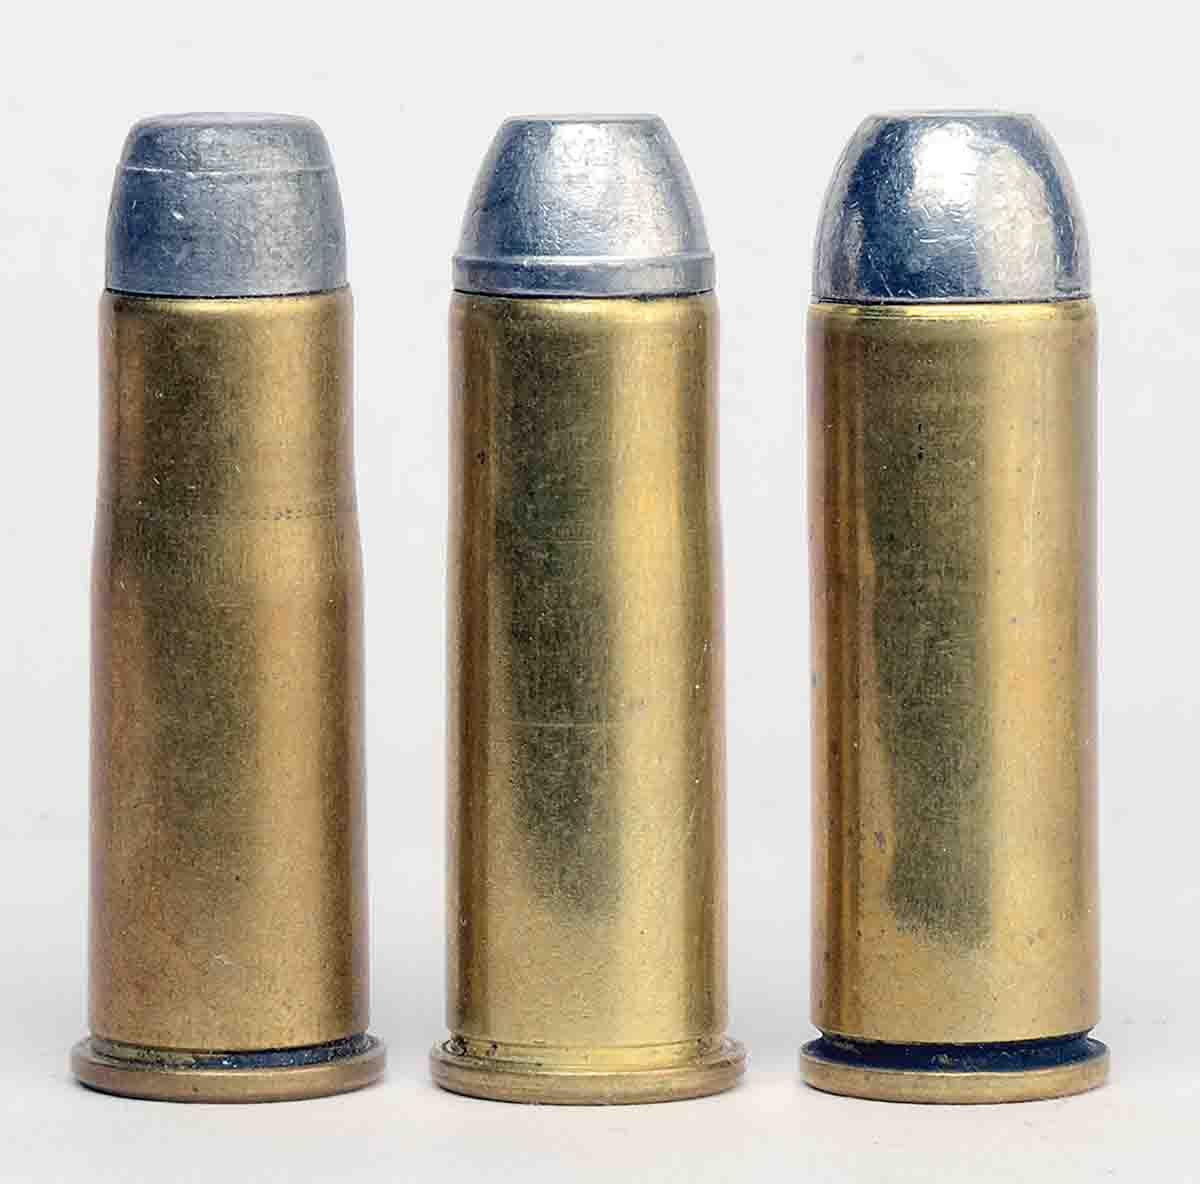 Trail Boss is a preferred powder for the (left to right): .38-40, .44-40 and .45 Colt.